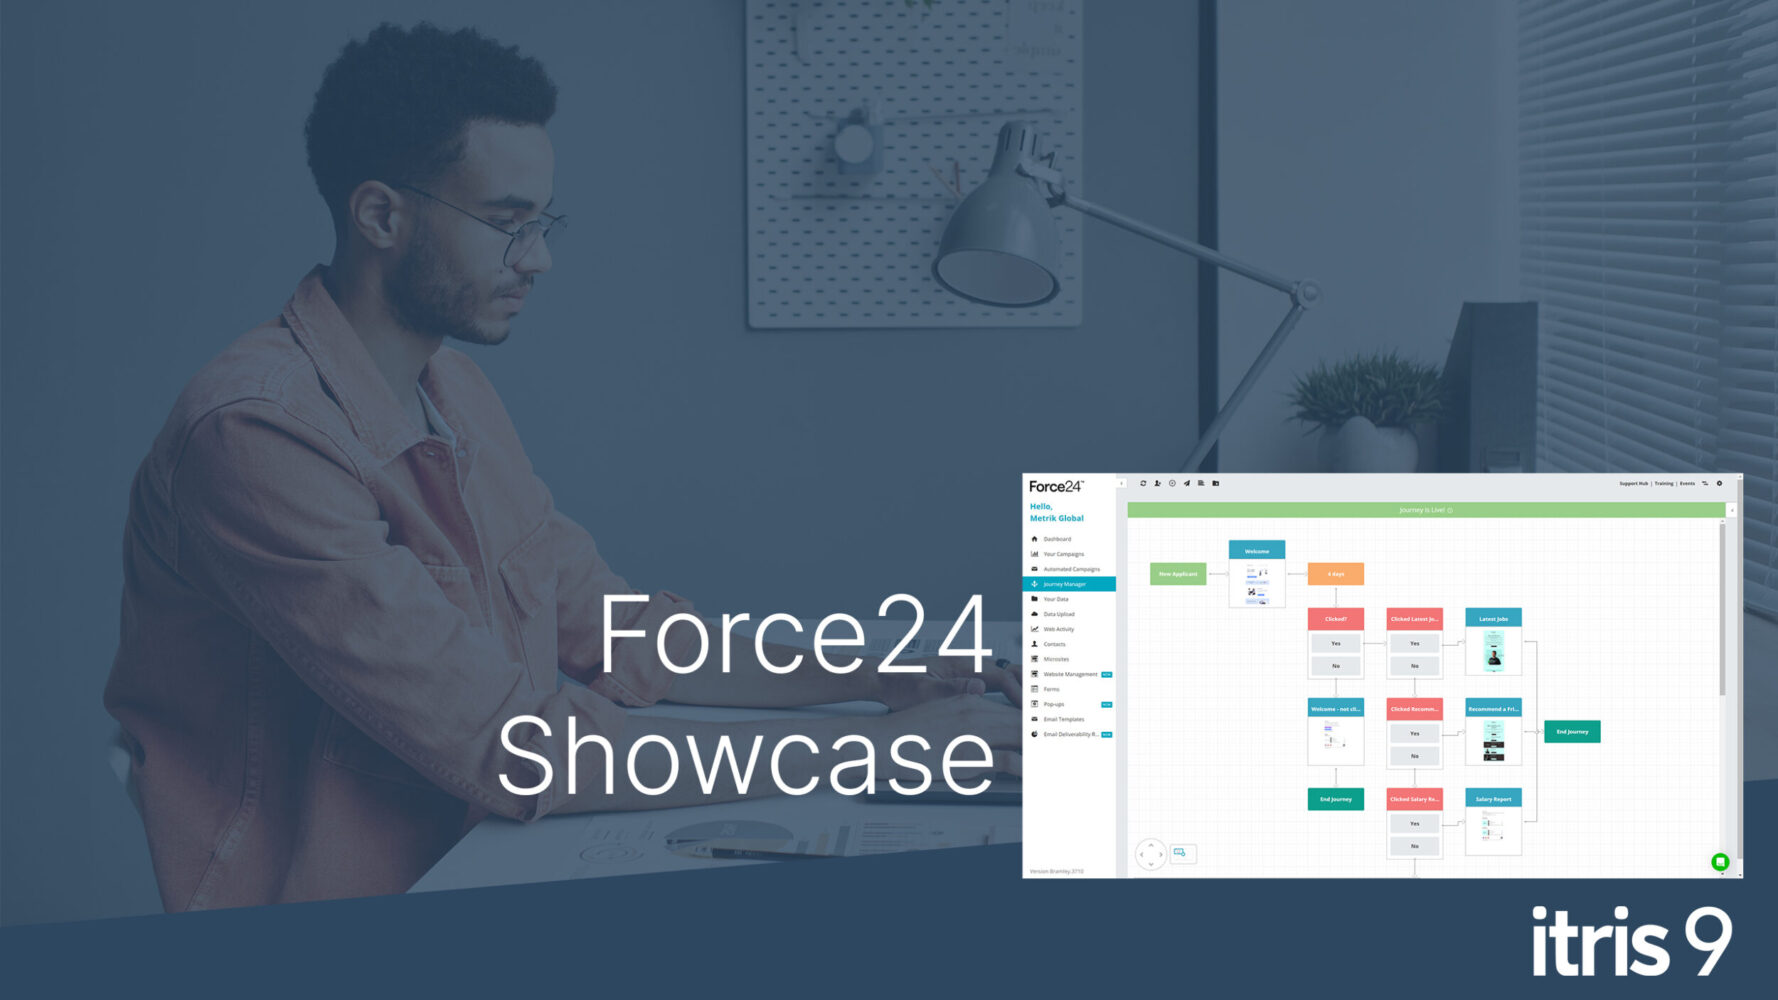 Recruitment CRM software itris 9 - Force24 showcase Video